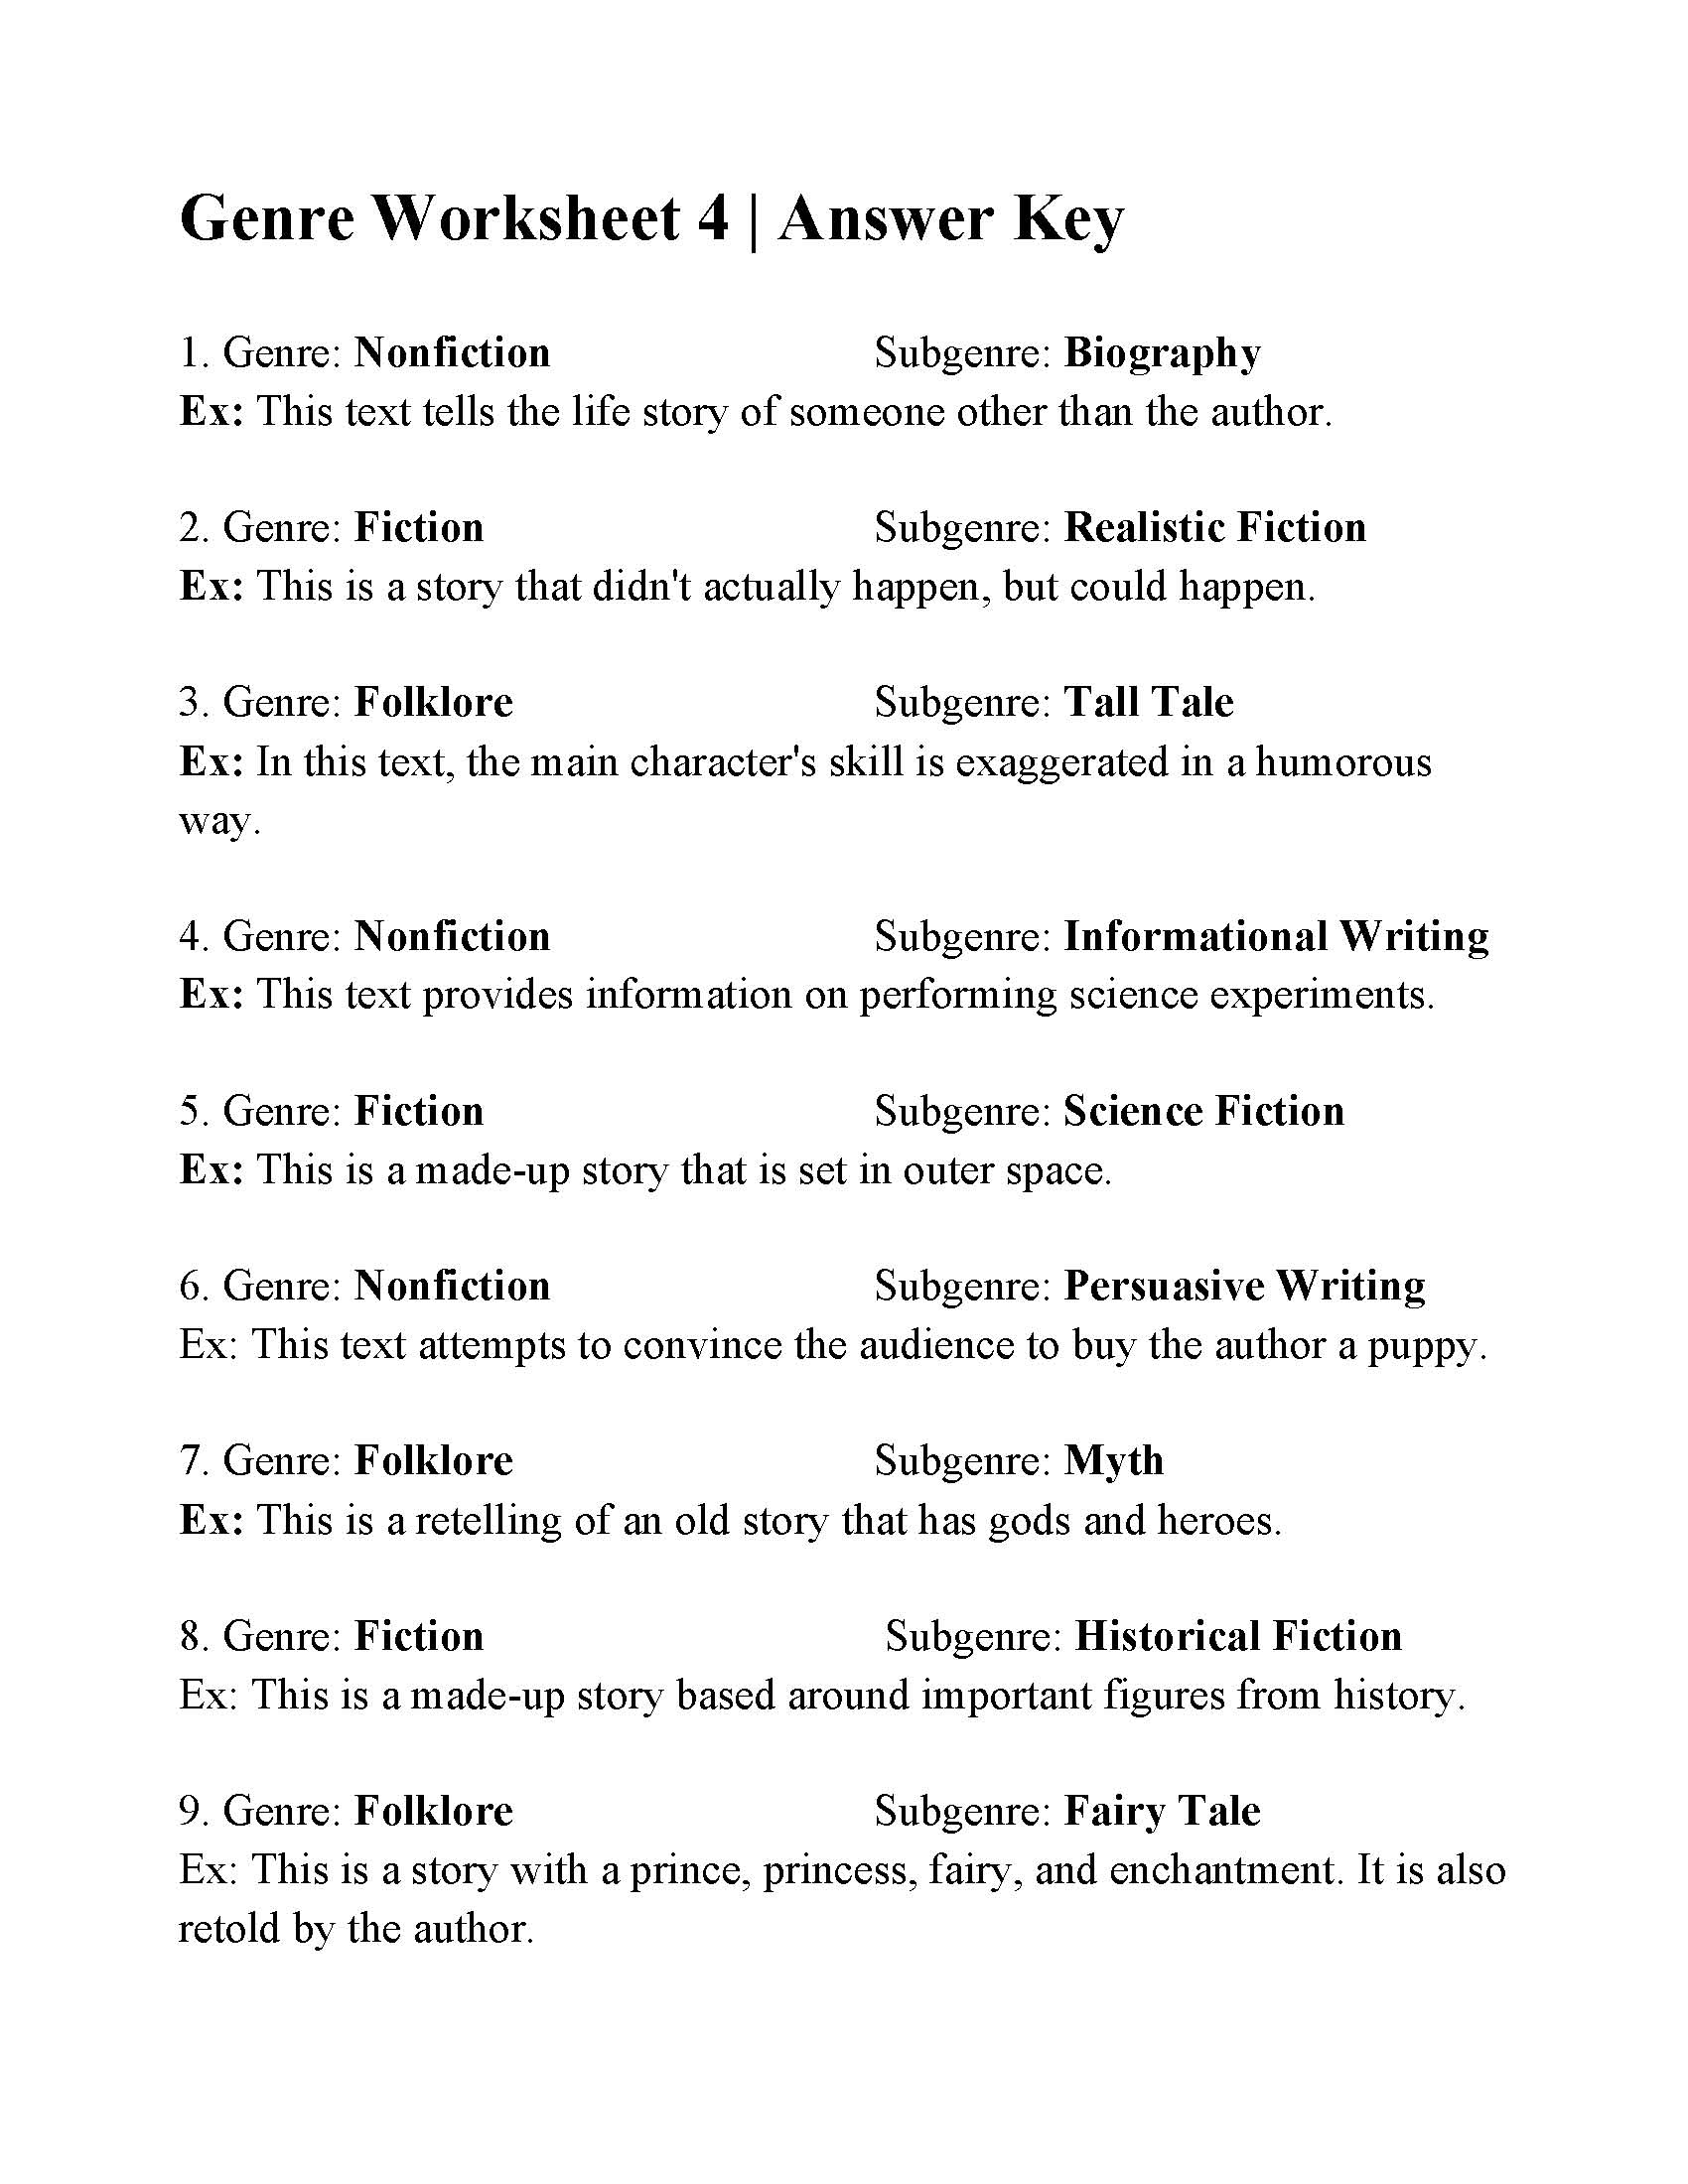 This is a preview image of Genre Worksheet 4. Click on it to enlarge it or view the source file.